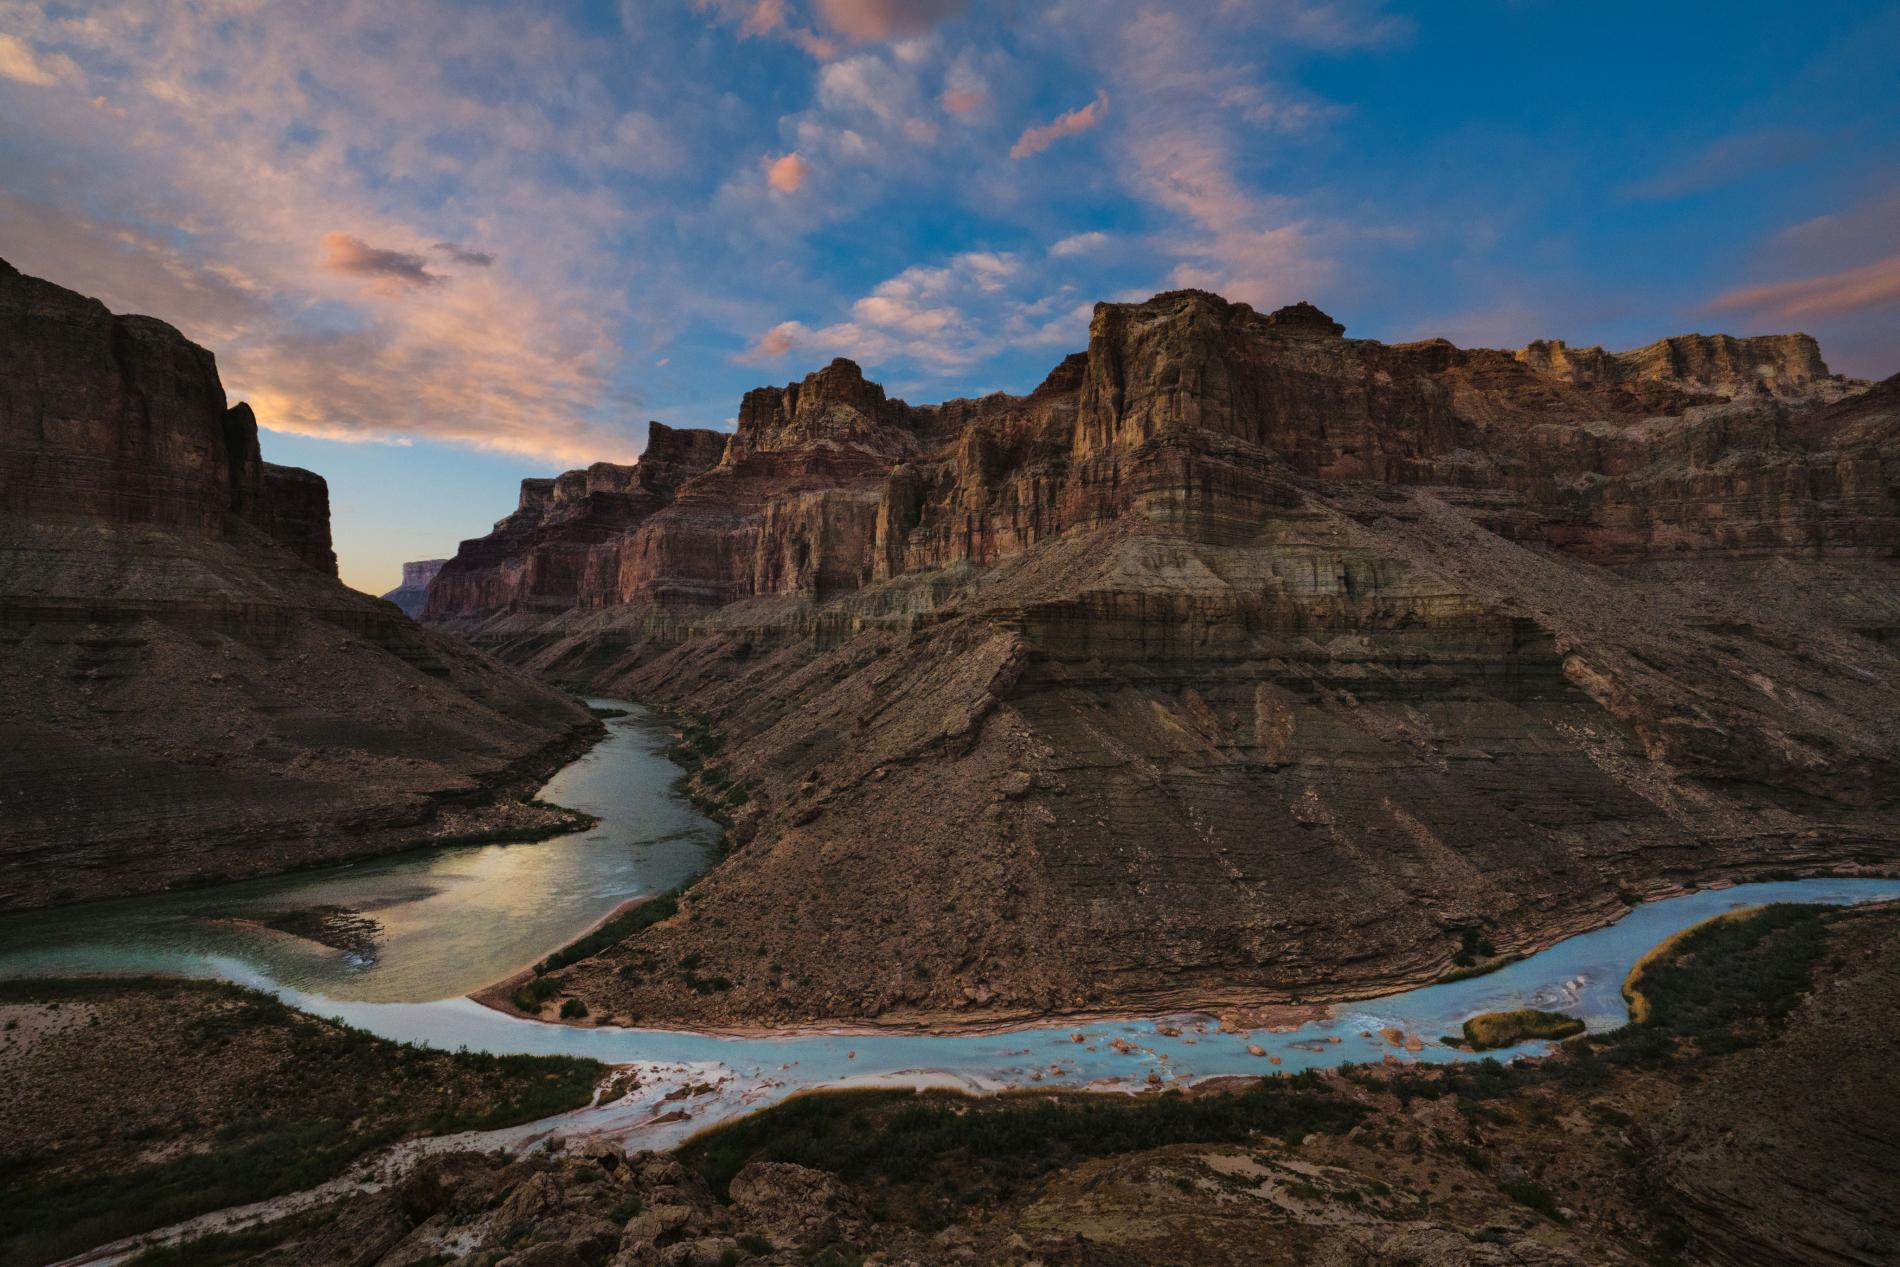 Local tribes regard the Confluence, where the Little Colorado’s blue waters merge with the Colorado, as sacred. Developers hope to build a tramway here to carry up to 10,000 tourists a day to a riverside retail and food complex. - National Geographic / Pete McBride